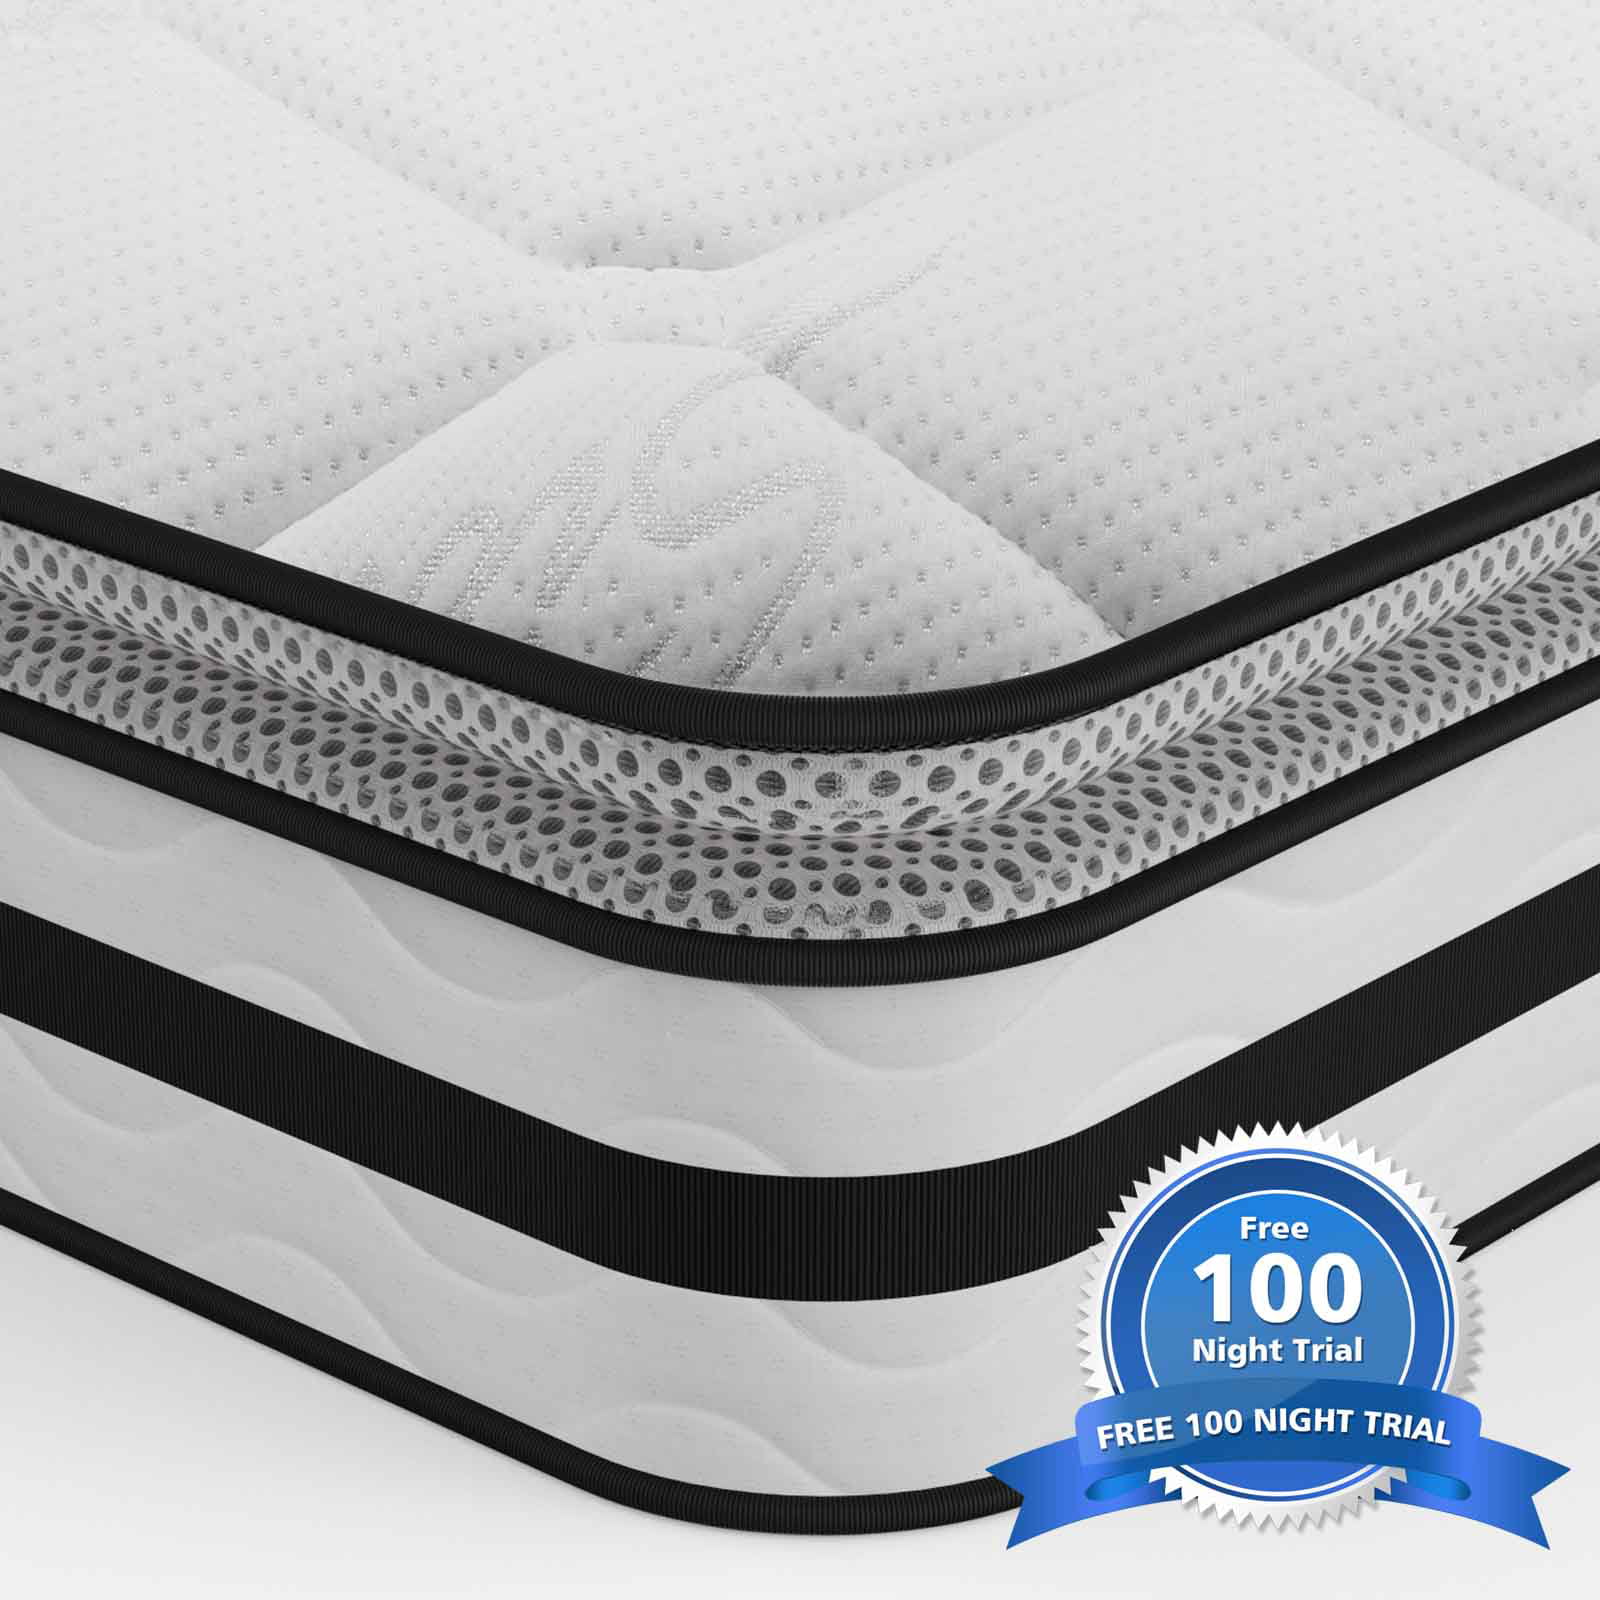 Medium Firm Feel Pressure Relief Sleeps Cooler Morpilot 10 inch Memory Foam and Innerspring Hybrid Mattress in a Box Individual Pocket Spring Motion Isolation Full Size Breathable Comfortable